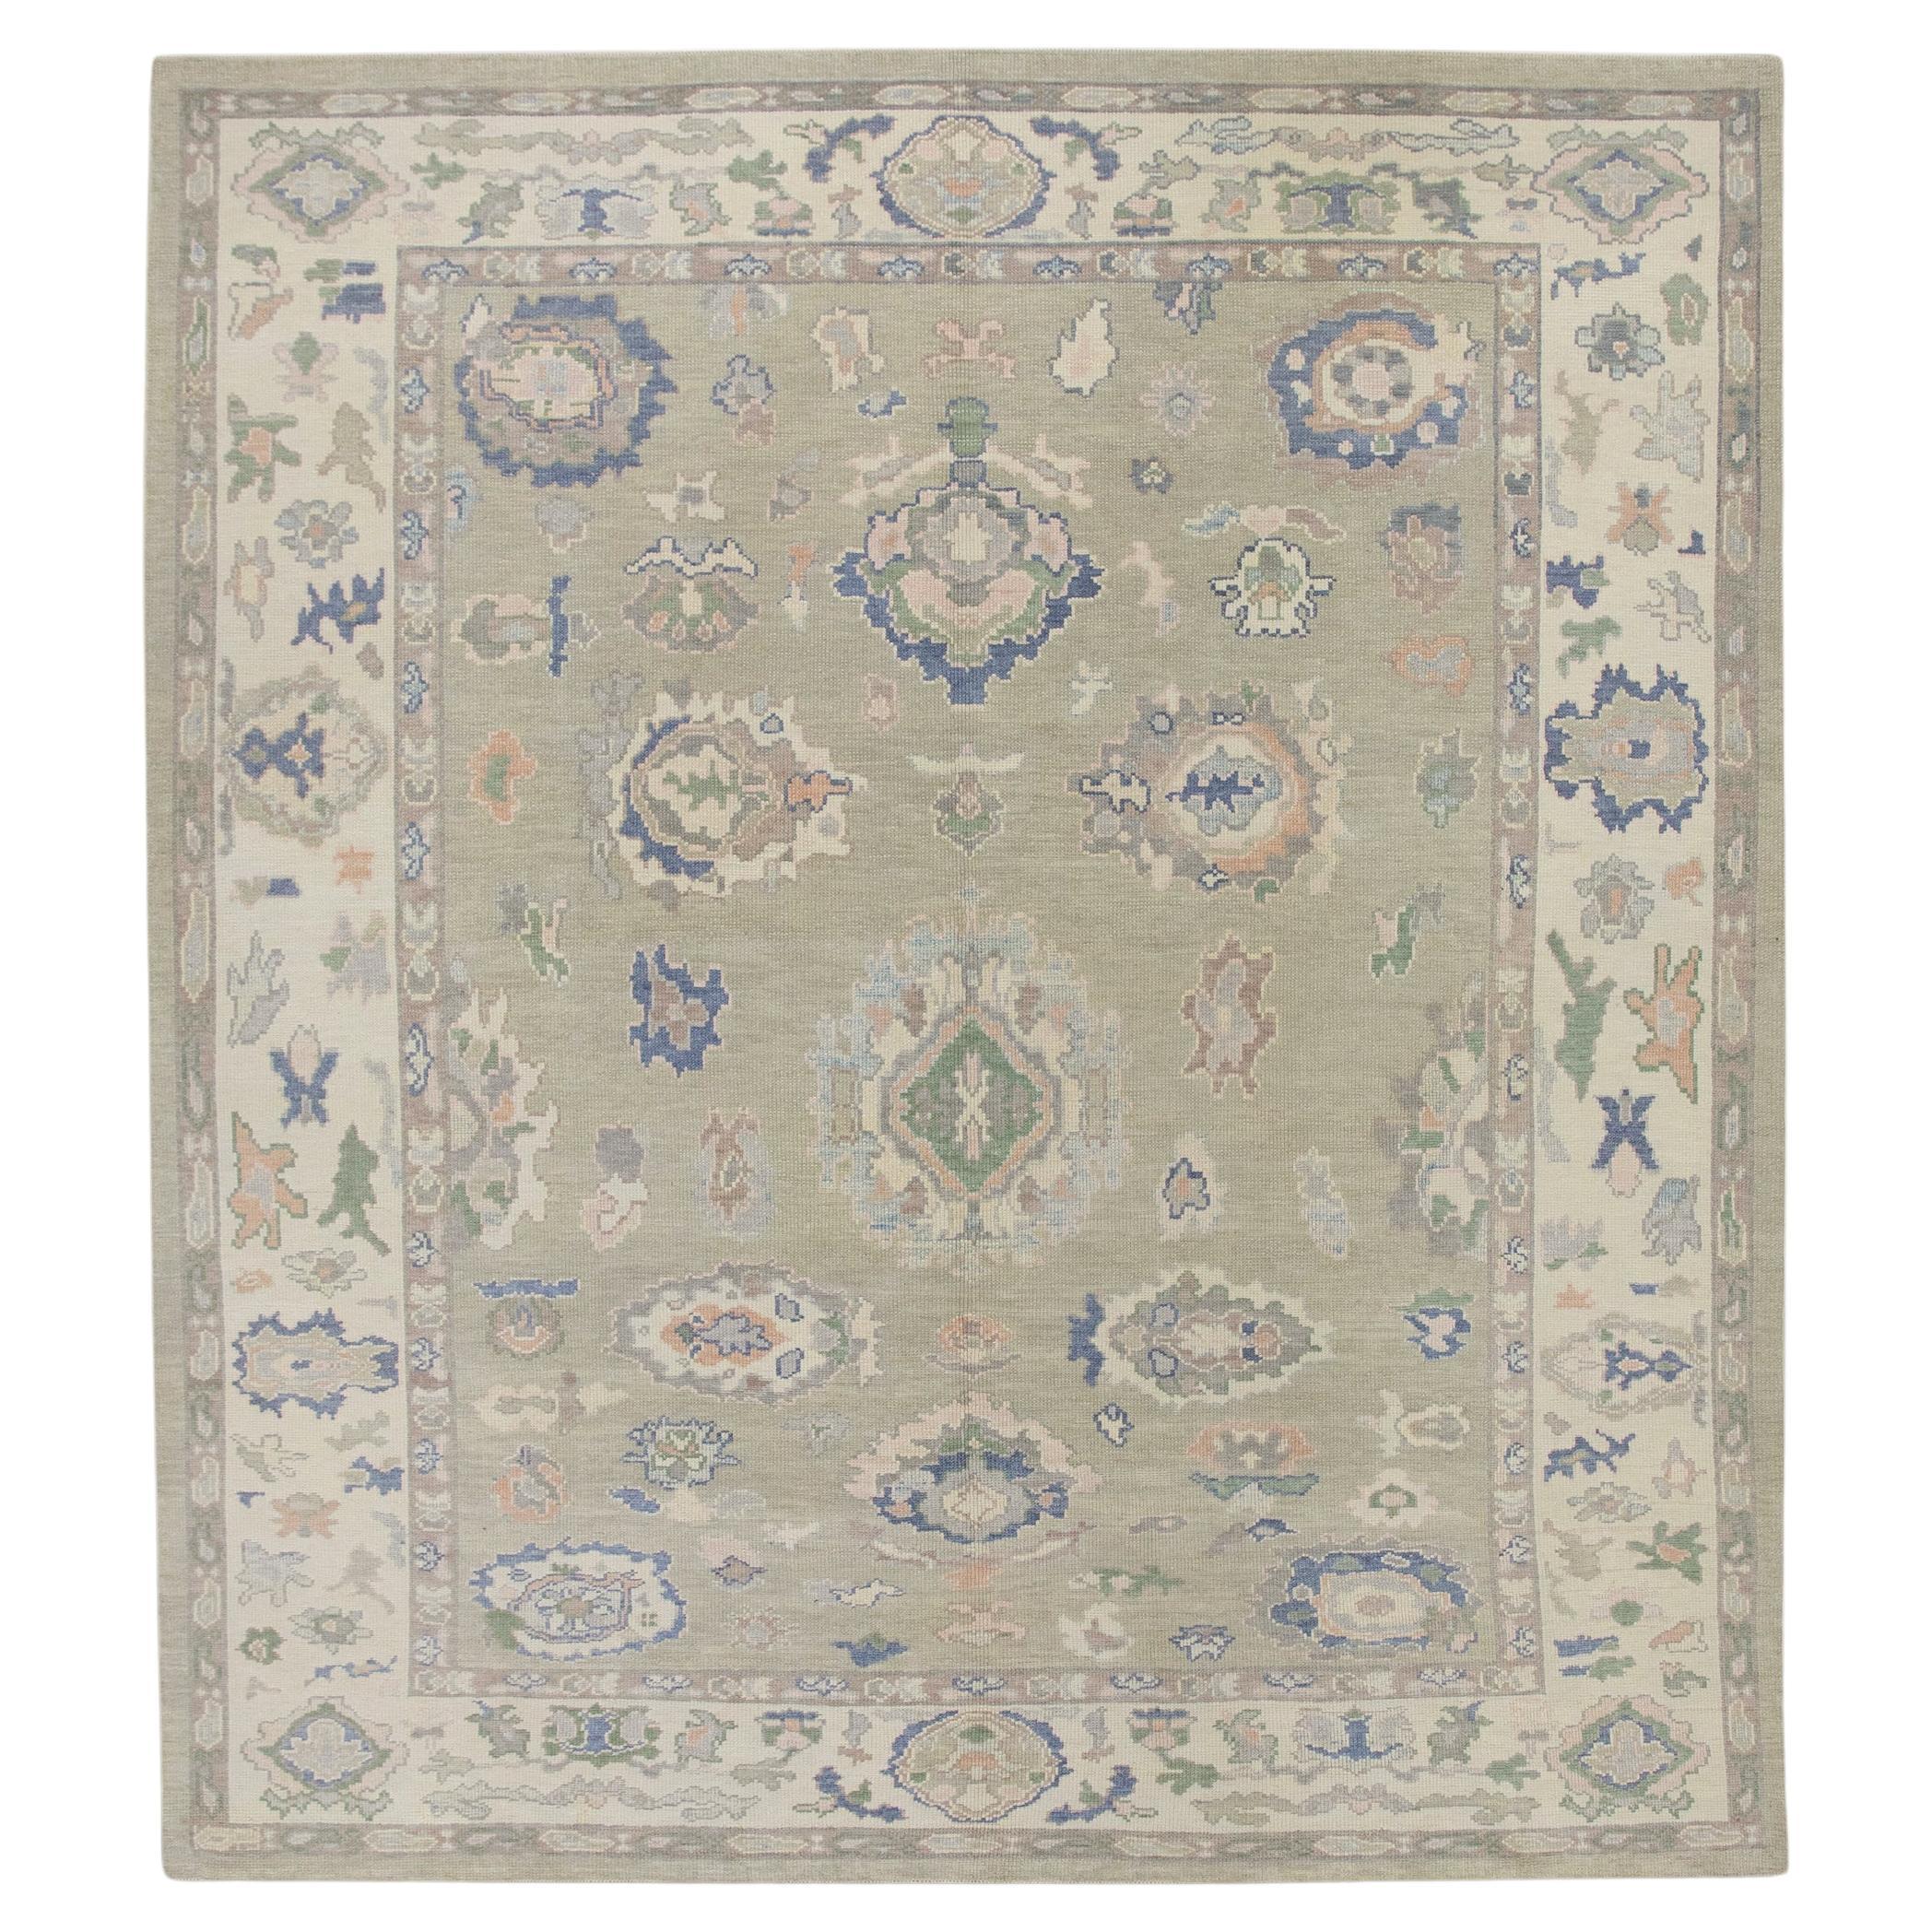 Green & Blue Floral Handwoven Wool Turkish Oushak Rug 8' x 9'1" For Sale